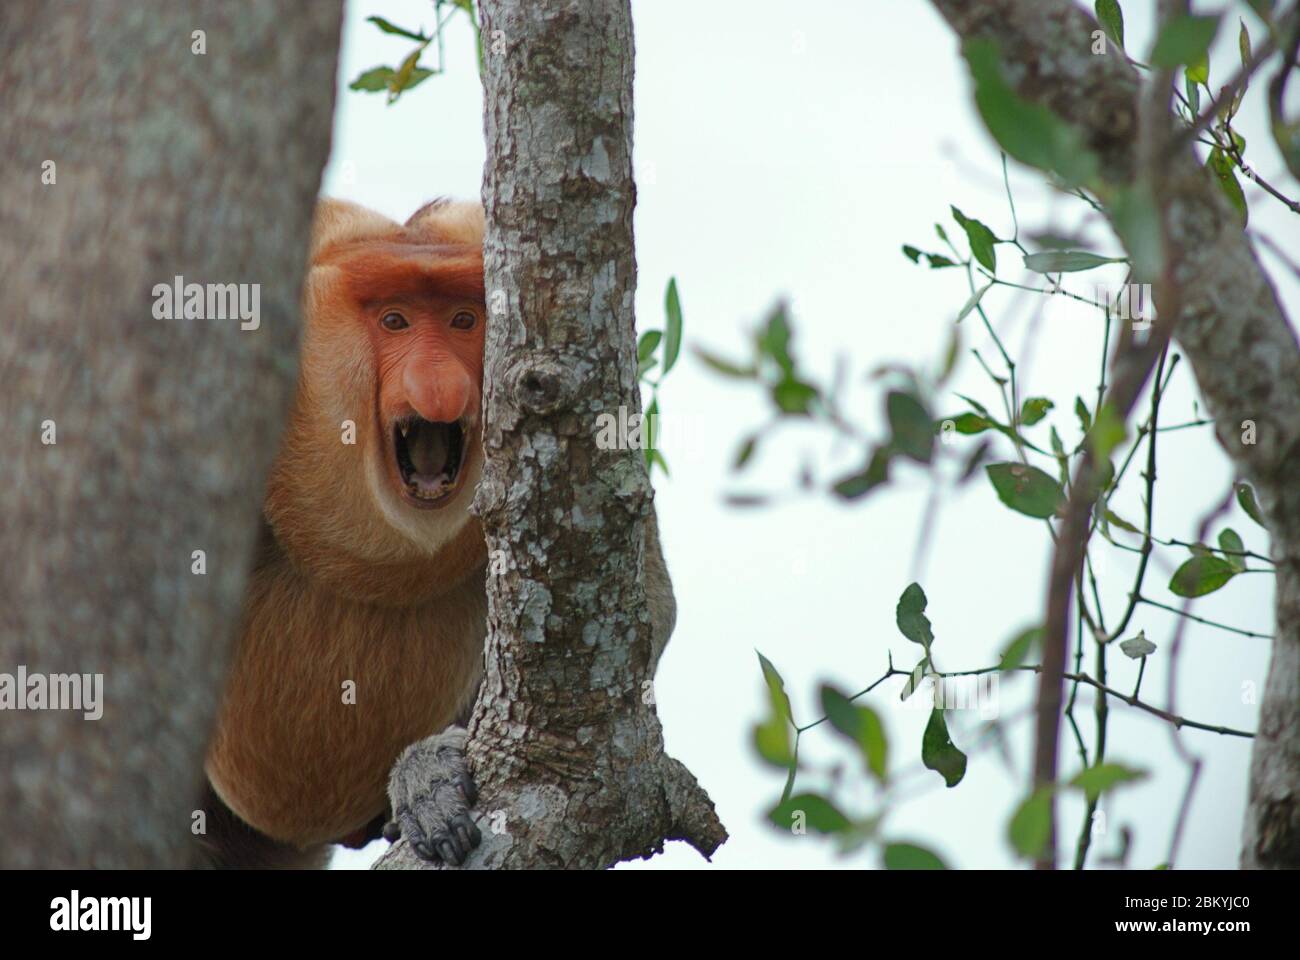 An alpha male of proboscis monkey (Nasalis larvatus) showing a warning gesture as he notices human presence in a riverside lowland forest in East Kalimantan province, Indonesia. Archival image. Stock Photo